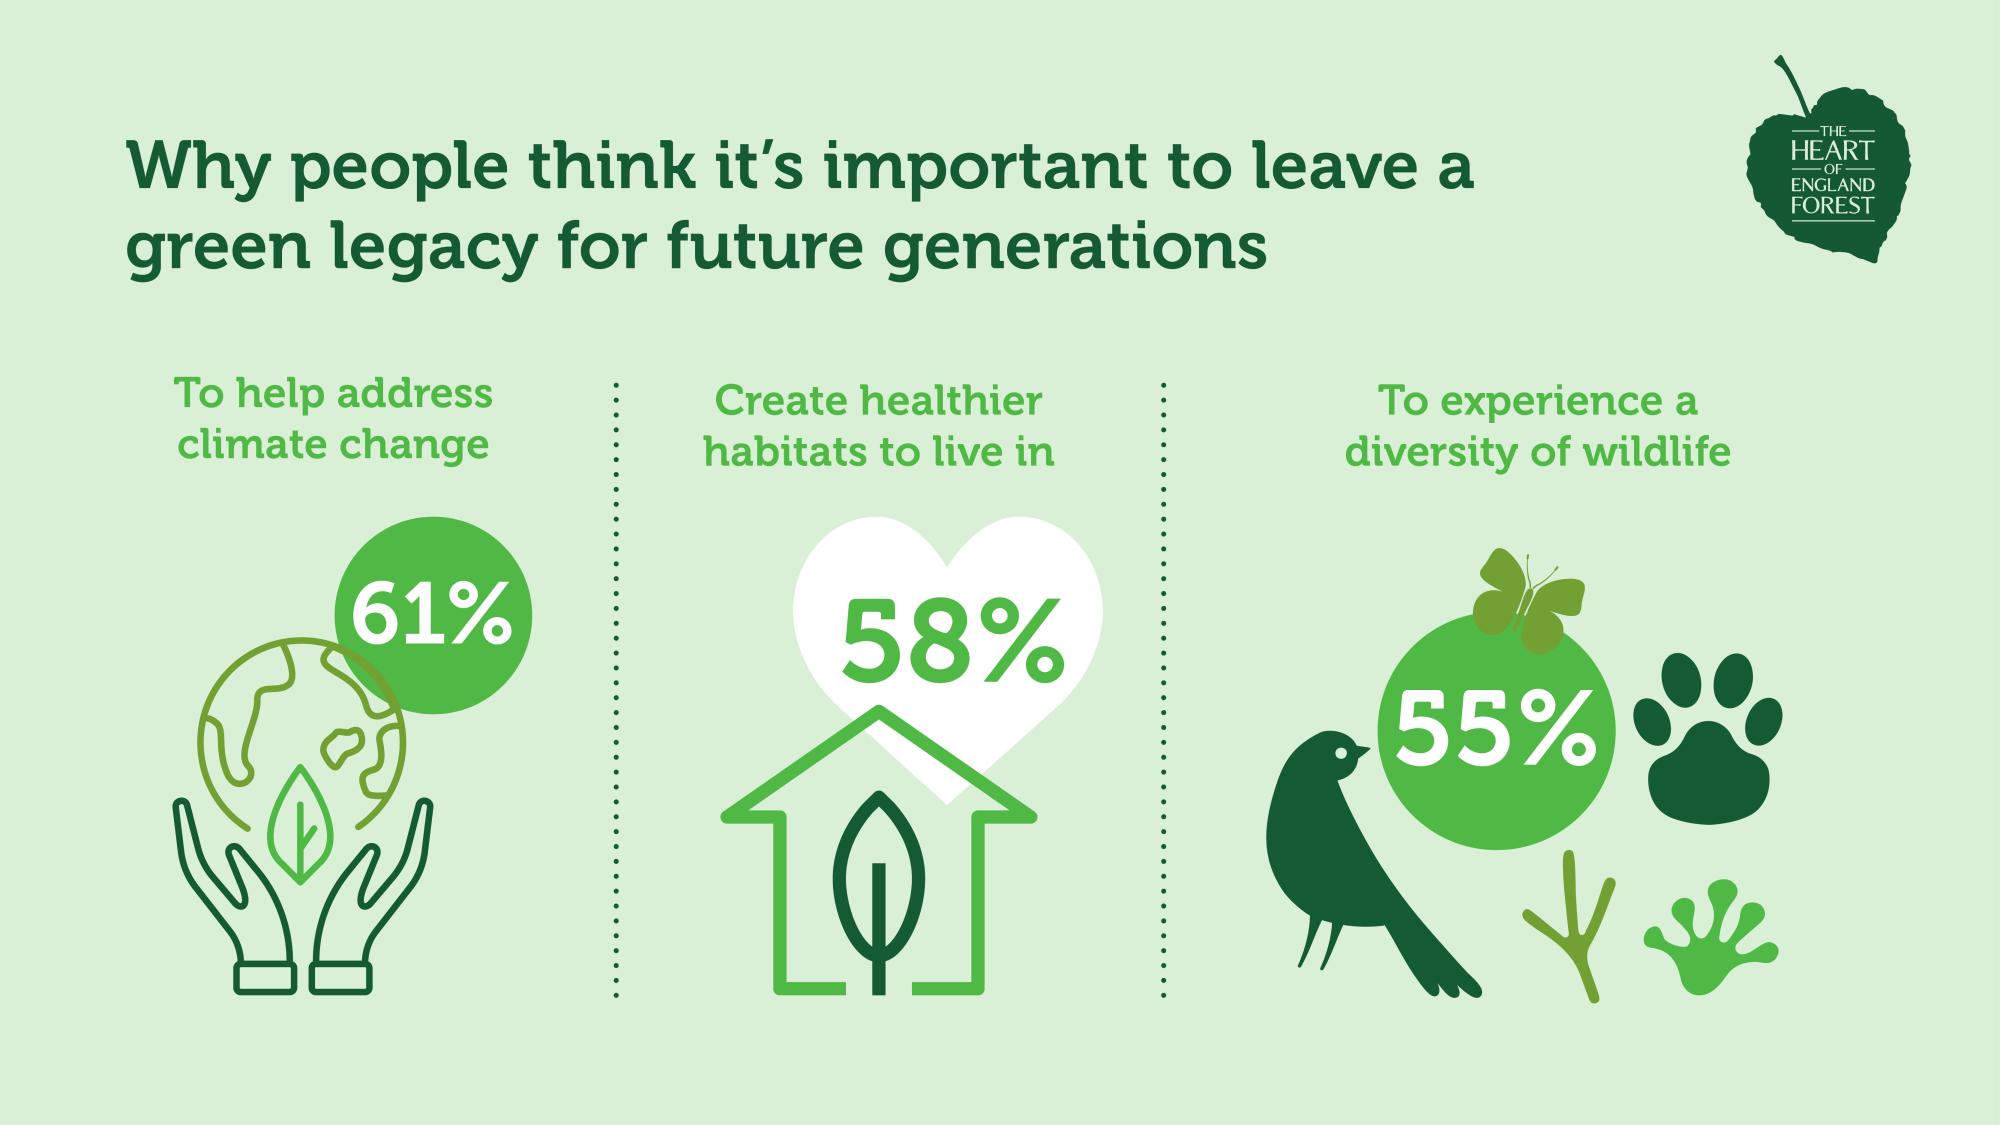 Infographic showing three reasons why people think it is important to leave a green legacy - to help address climate change, to create healthier habitats to life in, to experience a diversity of wildlife